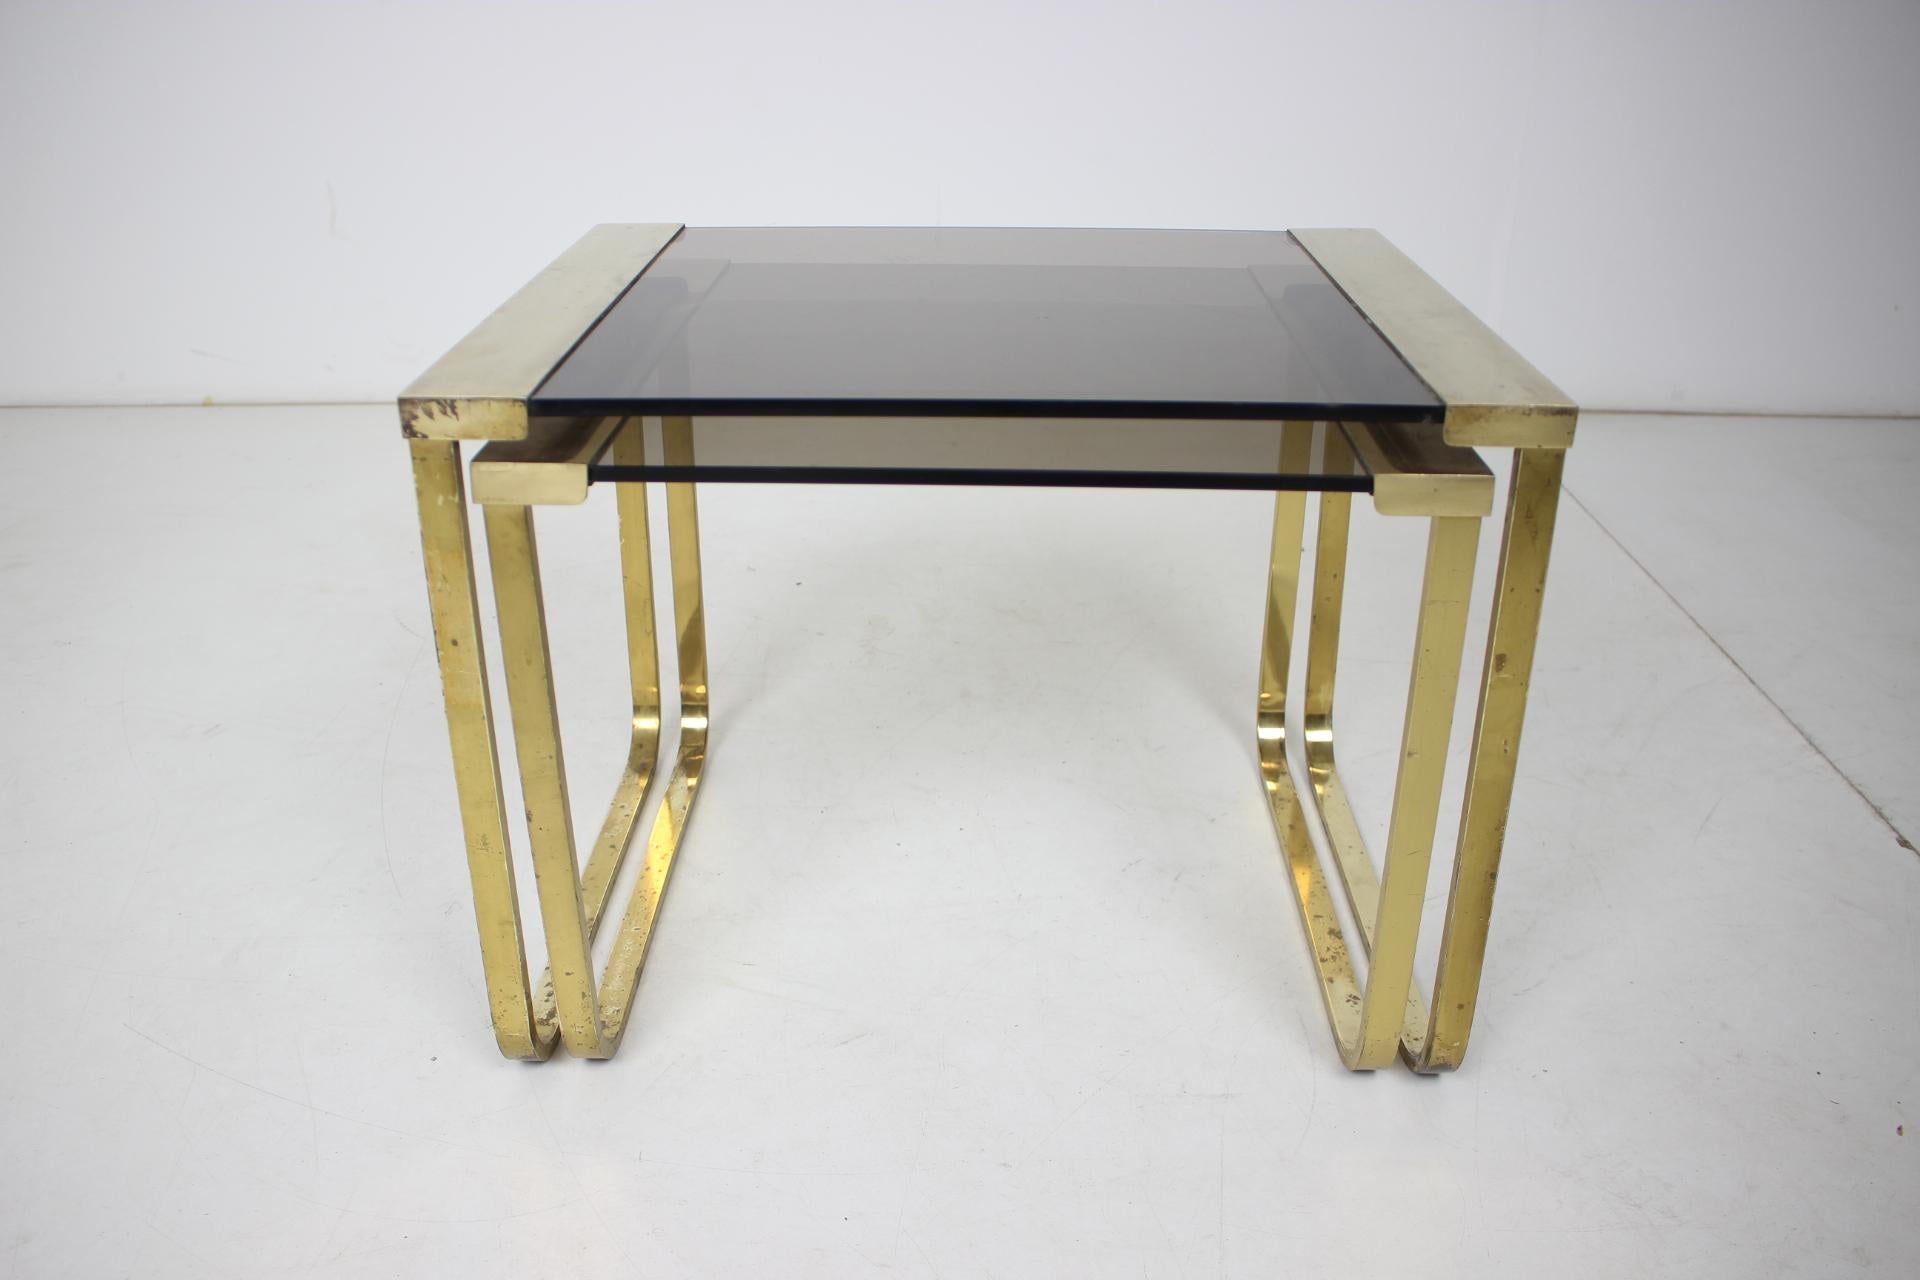 - Made in Germany
- Made of brass, glass
- Glass parts have scrabs
- Dimension of smaller table: H 36 x W 45 x D 41 cm
- Good, original condition.